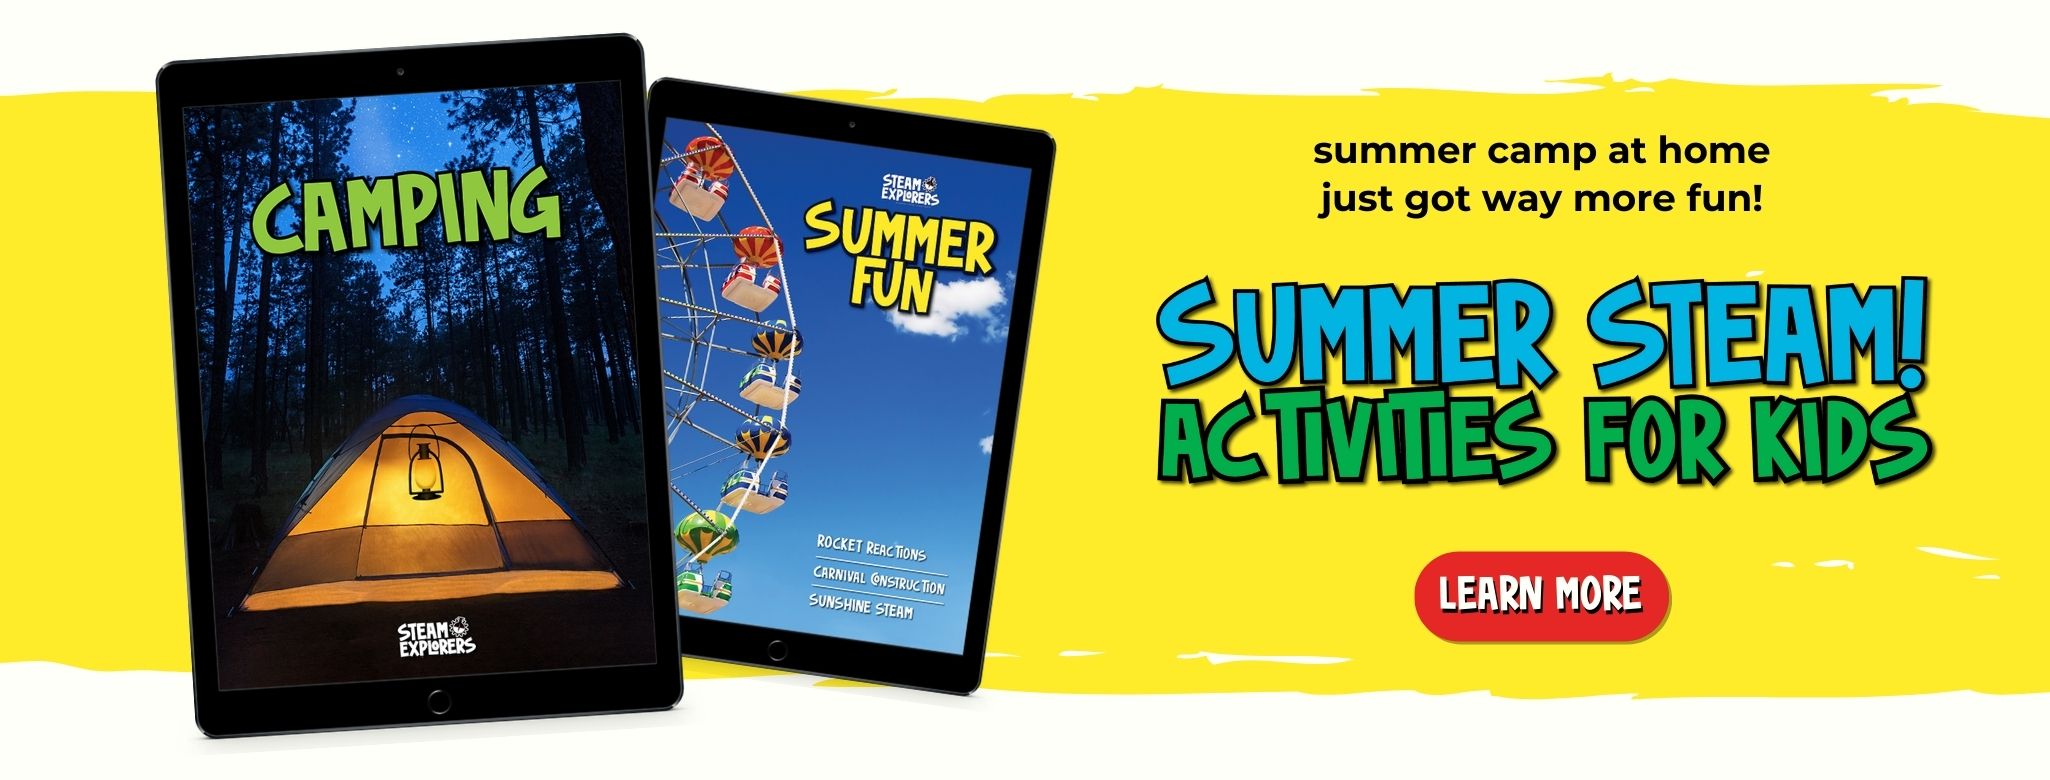 summer steam activities for kids camping and summer fun ebook ipads on yellow